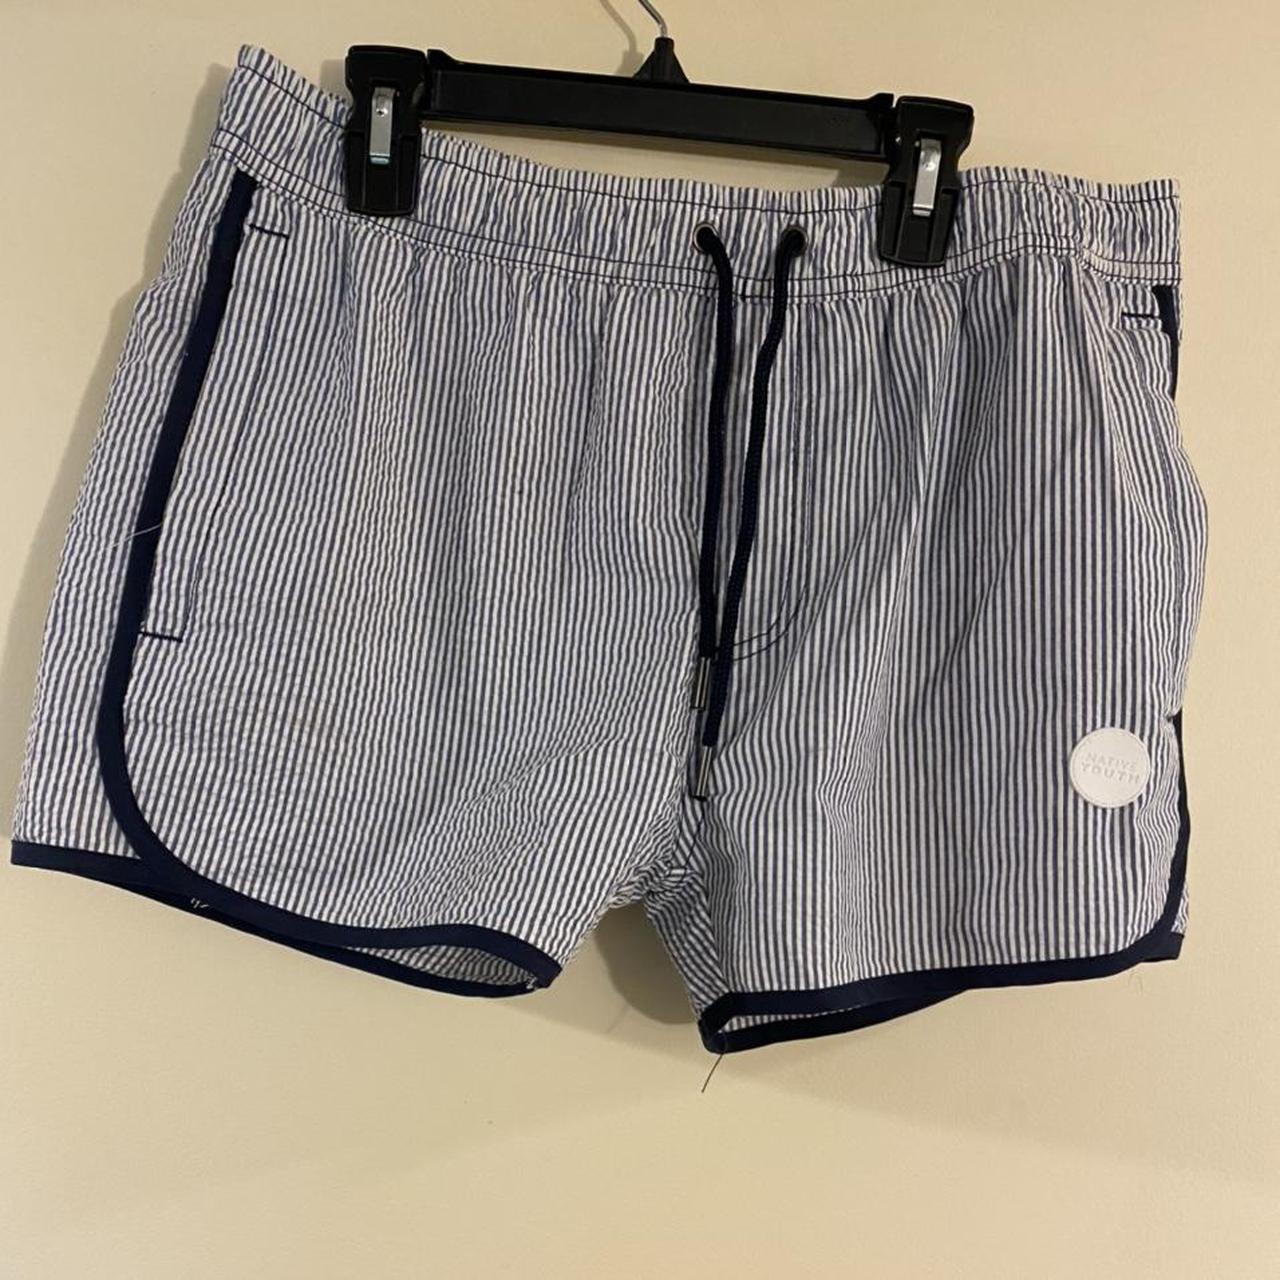 Native Youth Men's Blue and White Shorts